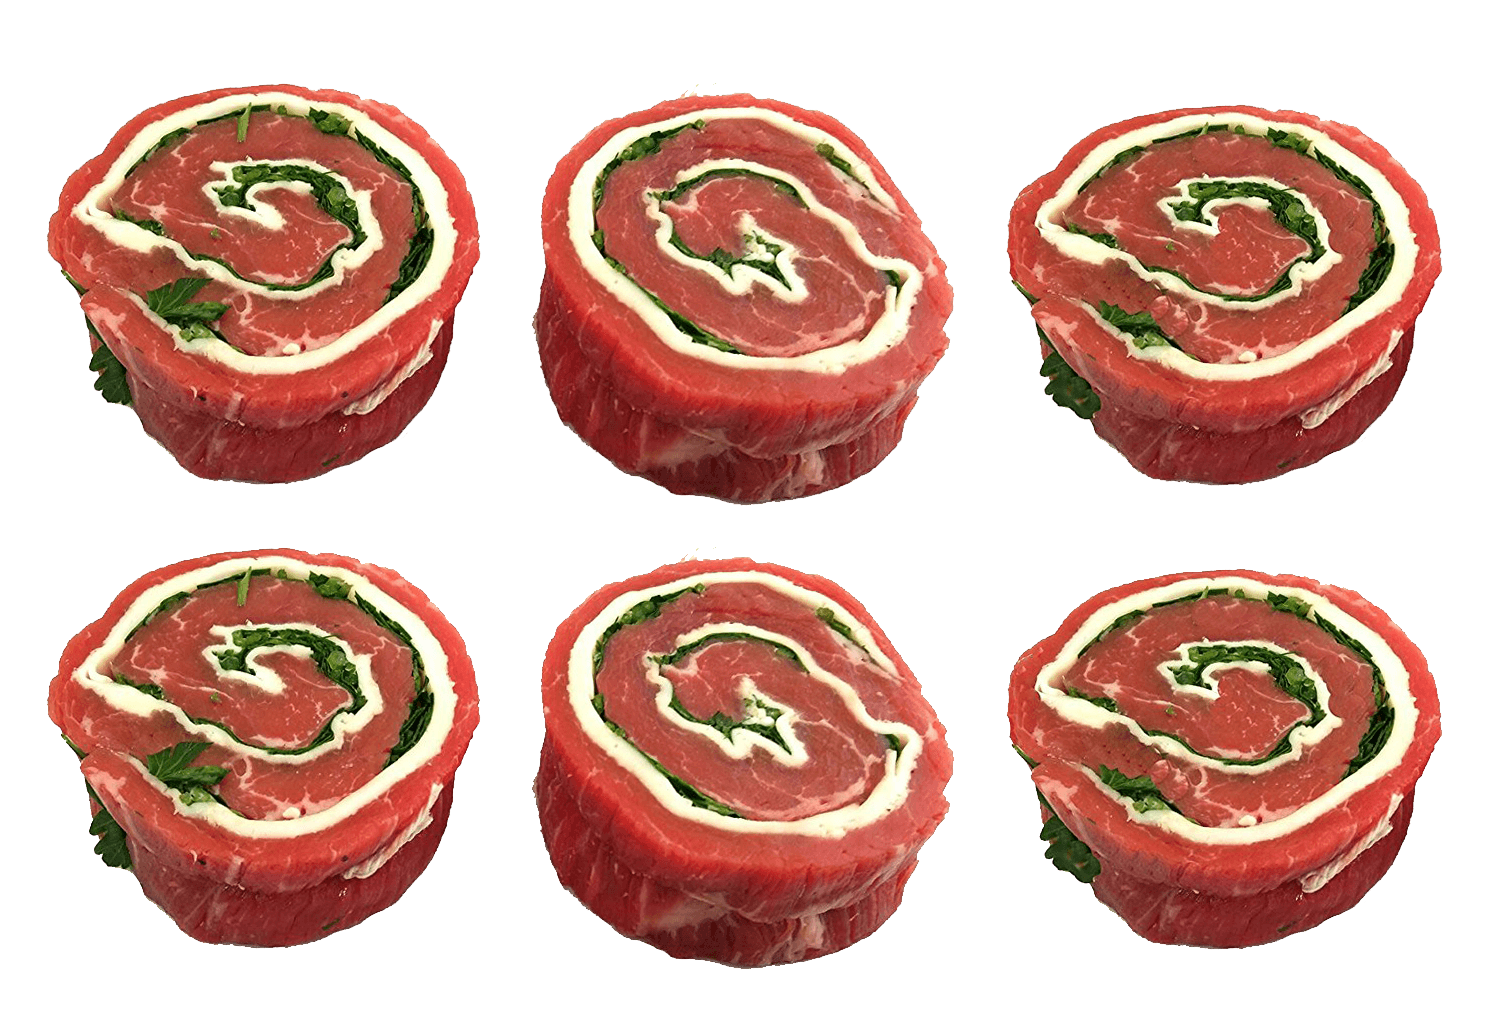 Fresh Local Meat Delivery - Stuffed Flank Steak Pinwheels Made Fresh Daily Pack Of 6 (Italian Stuffed Beef Rolls) Includes Shipping